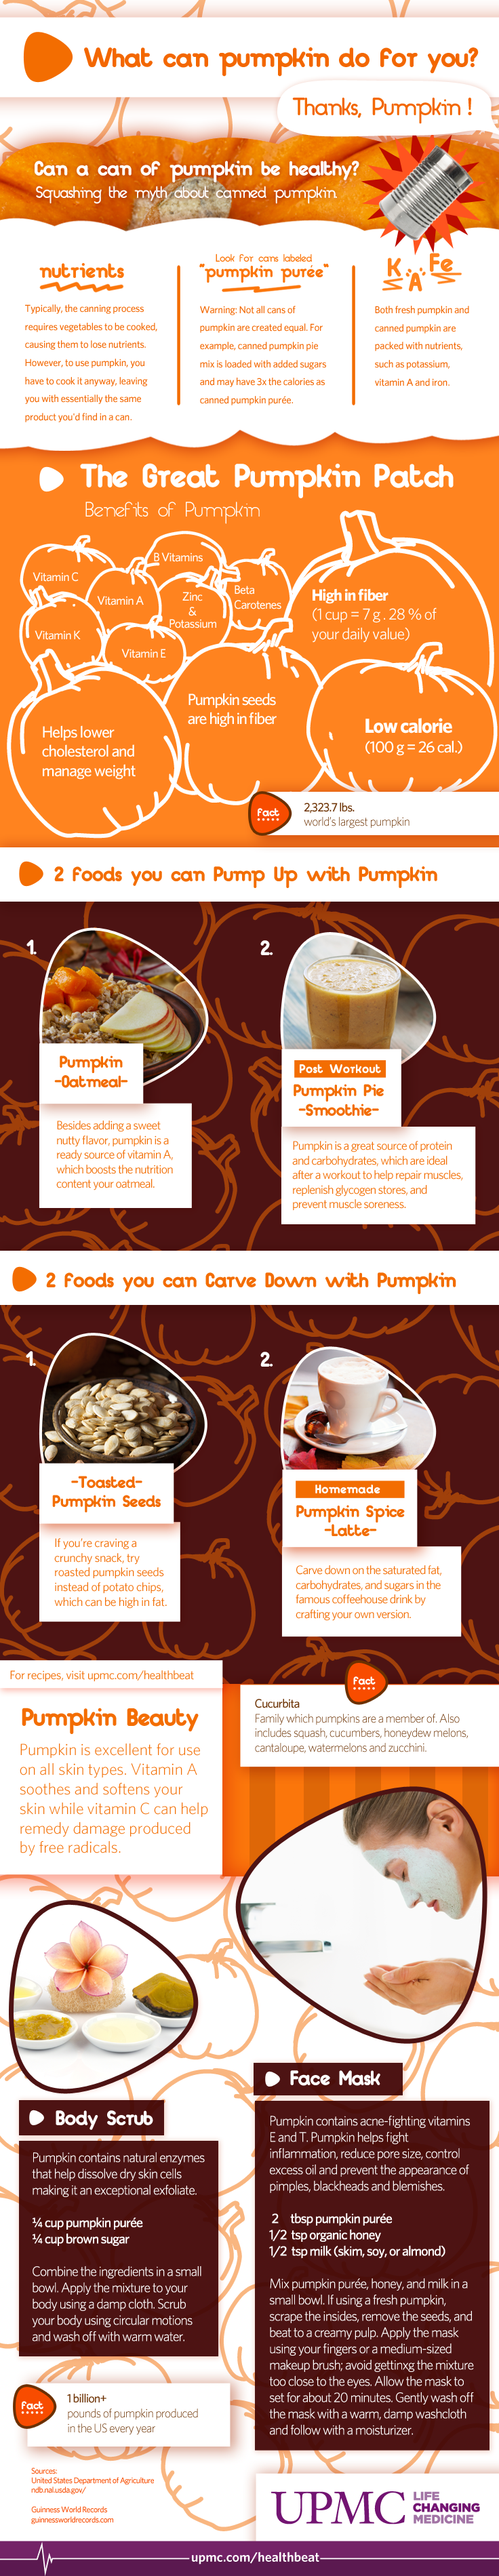 Discover the health benefits of pumpkin